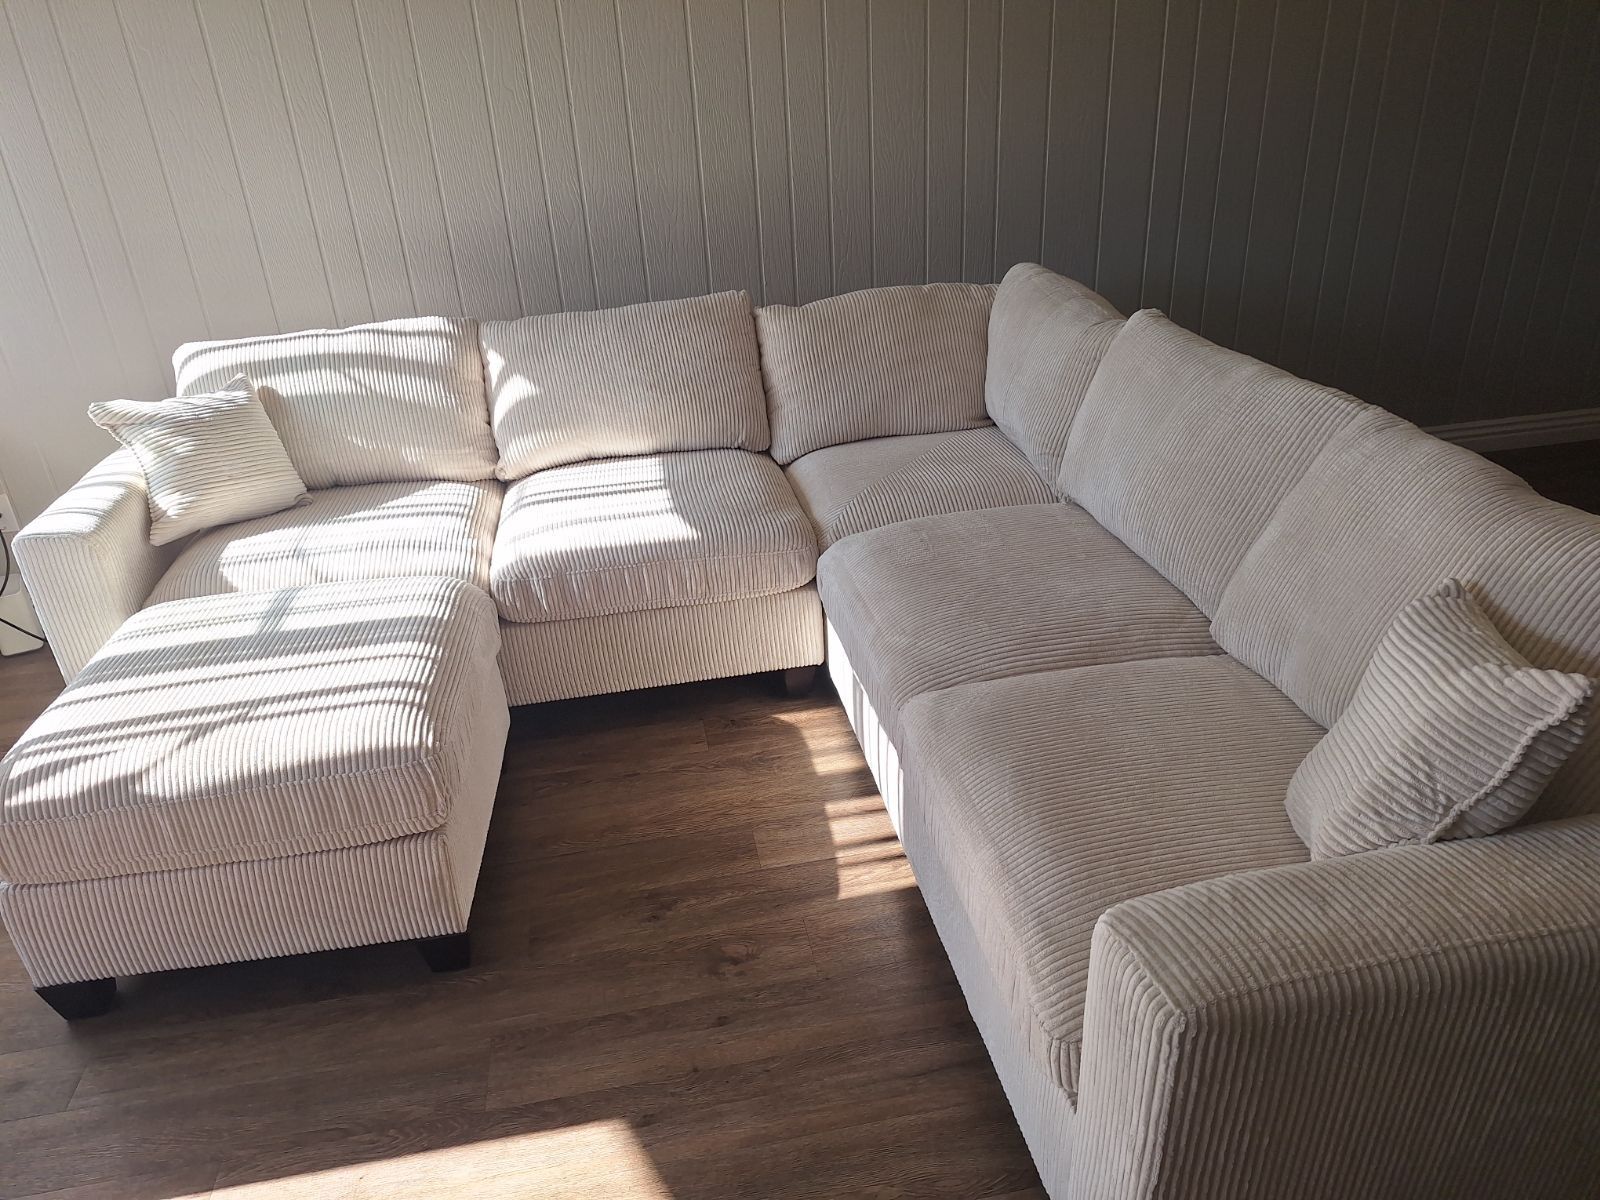 New 99x99 Off White Corduroy Sectional Couch / Free Delivery 